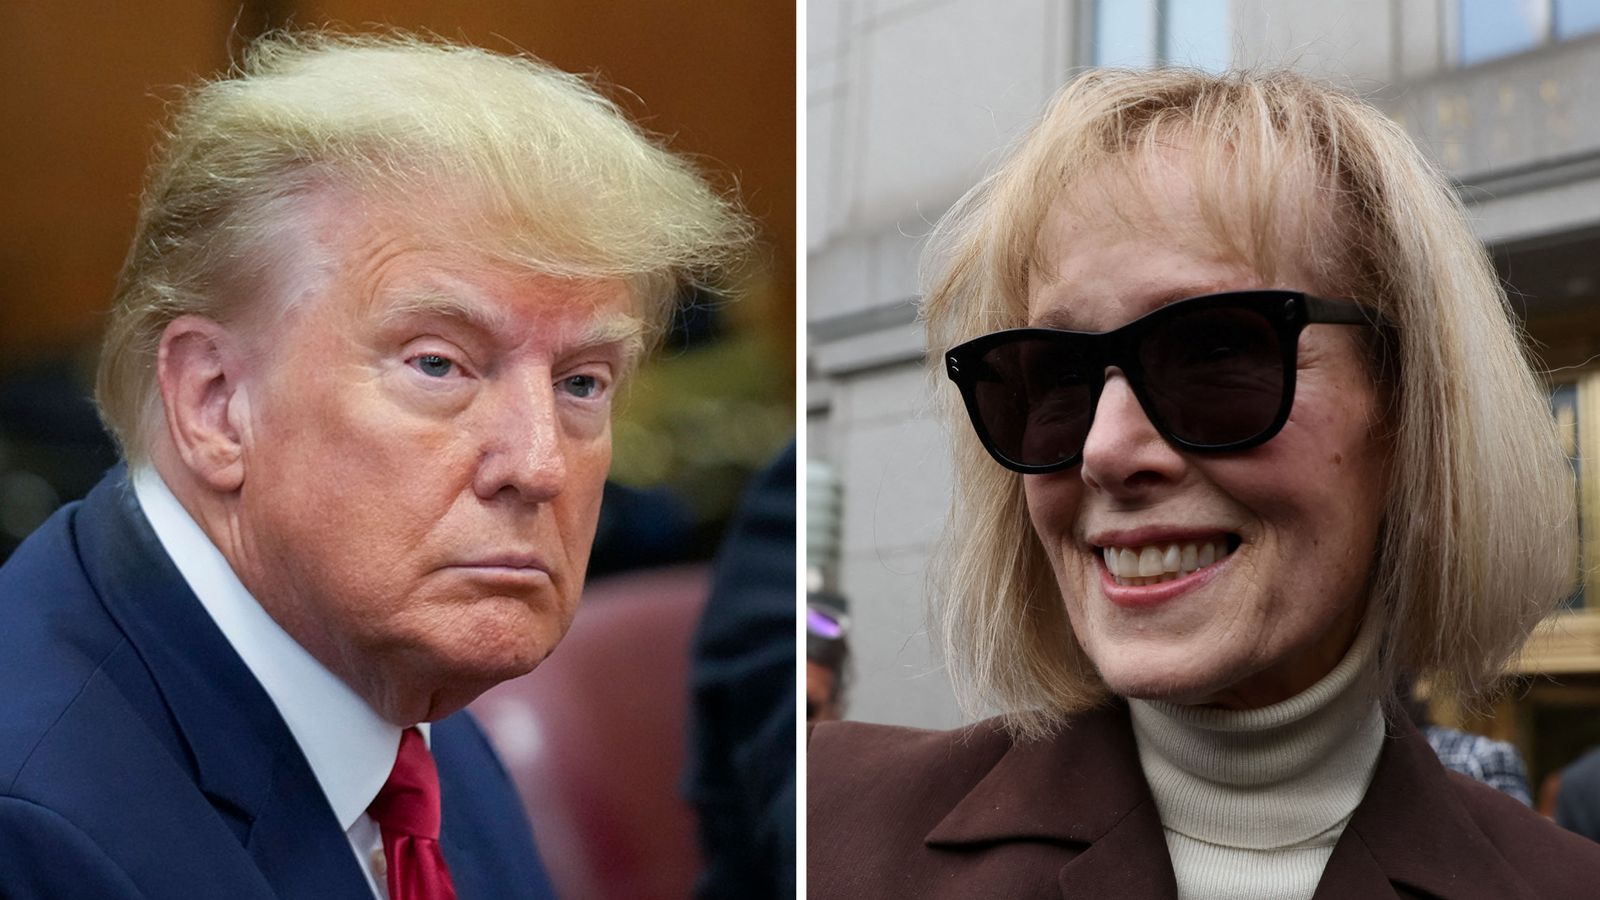 Trump attacks 'biased' judge and will appeal after jury finds he sexually abused writer E Jean Carroll in changing room